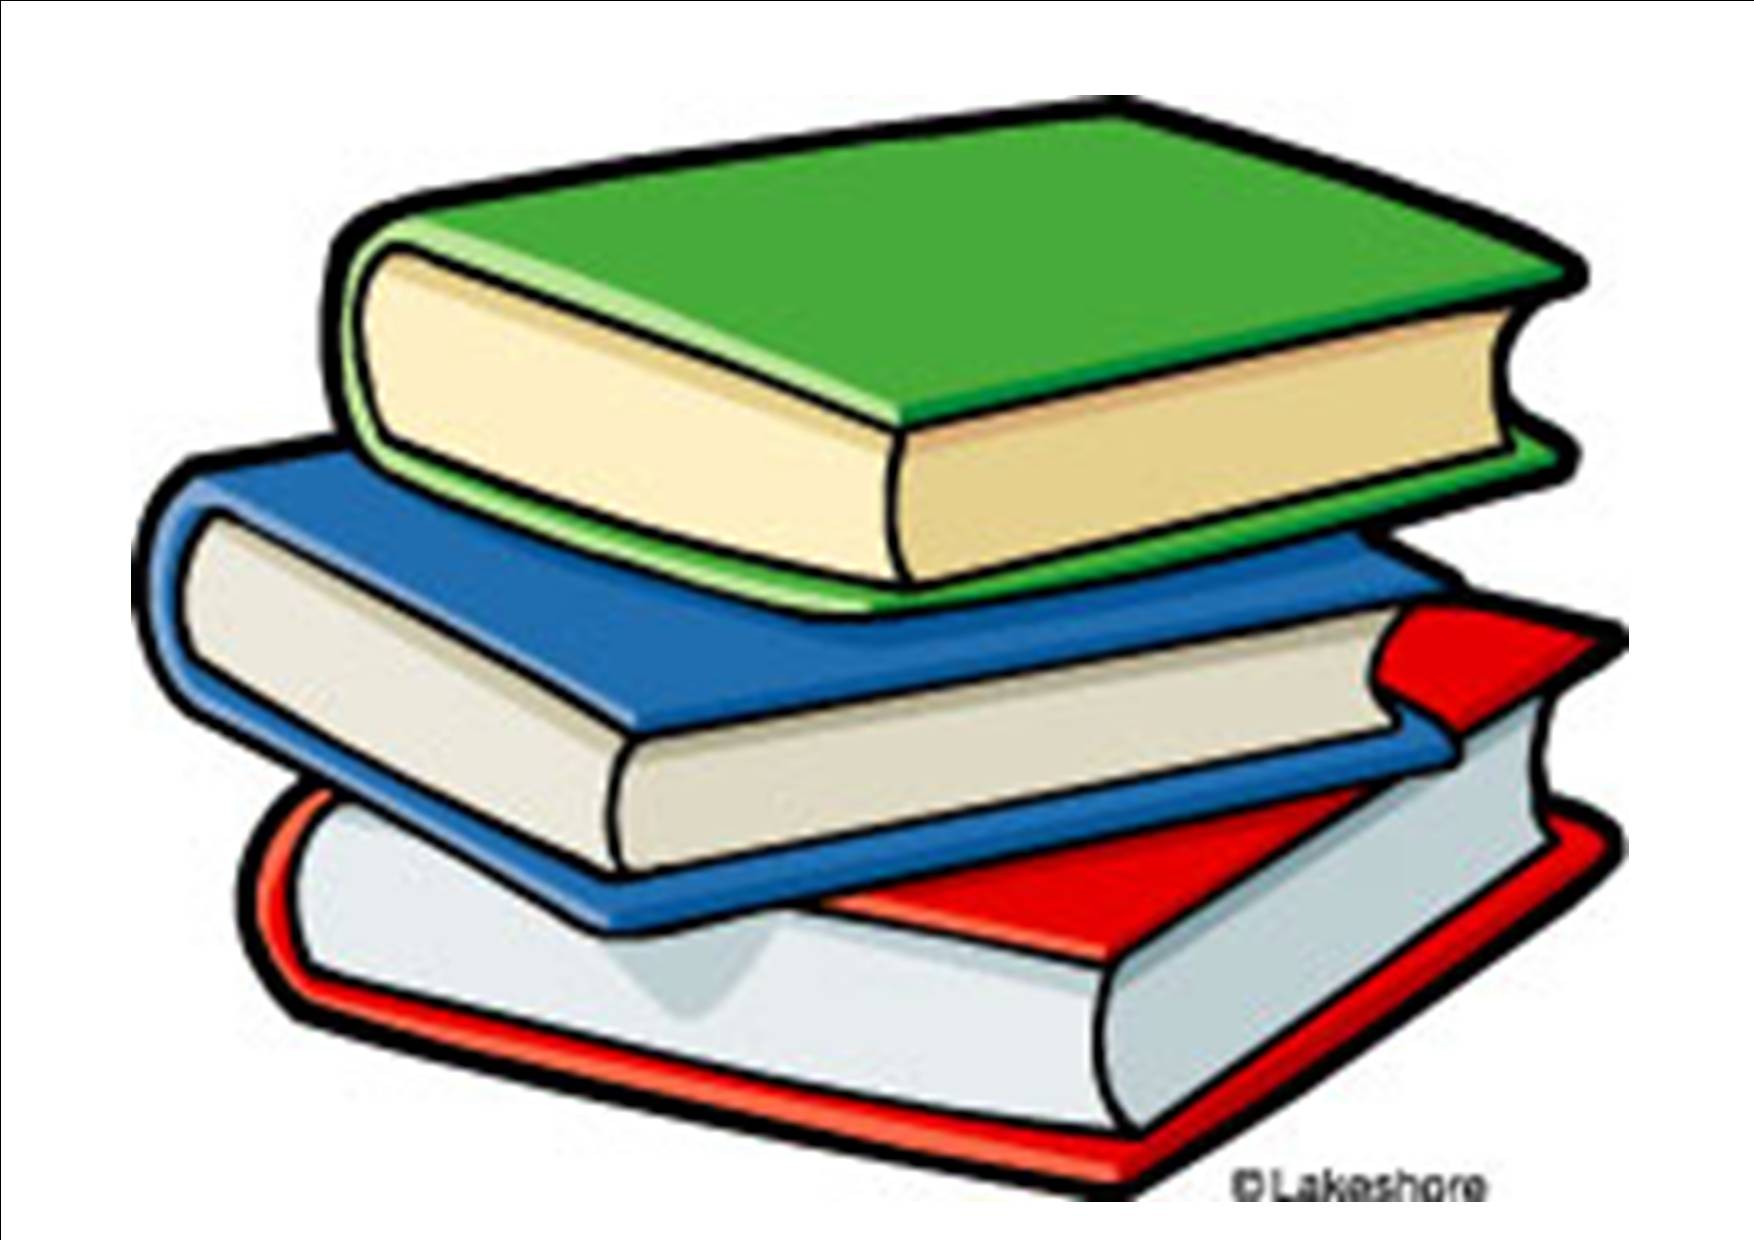 School supplies clipart free images 2